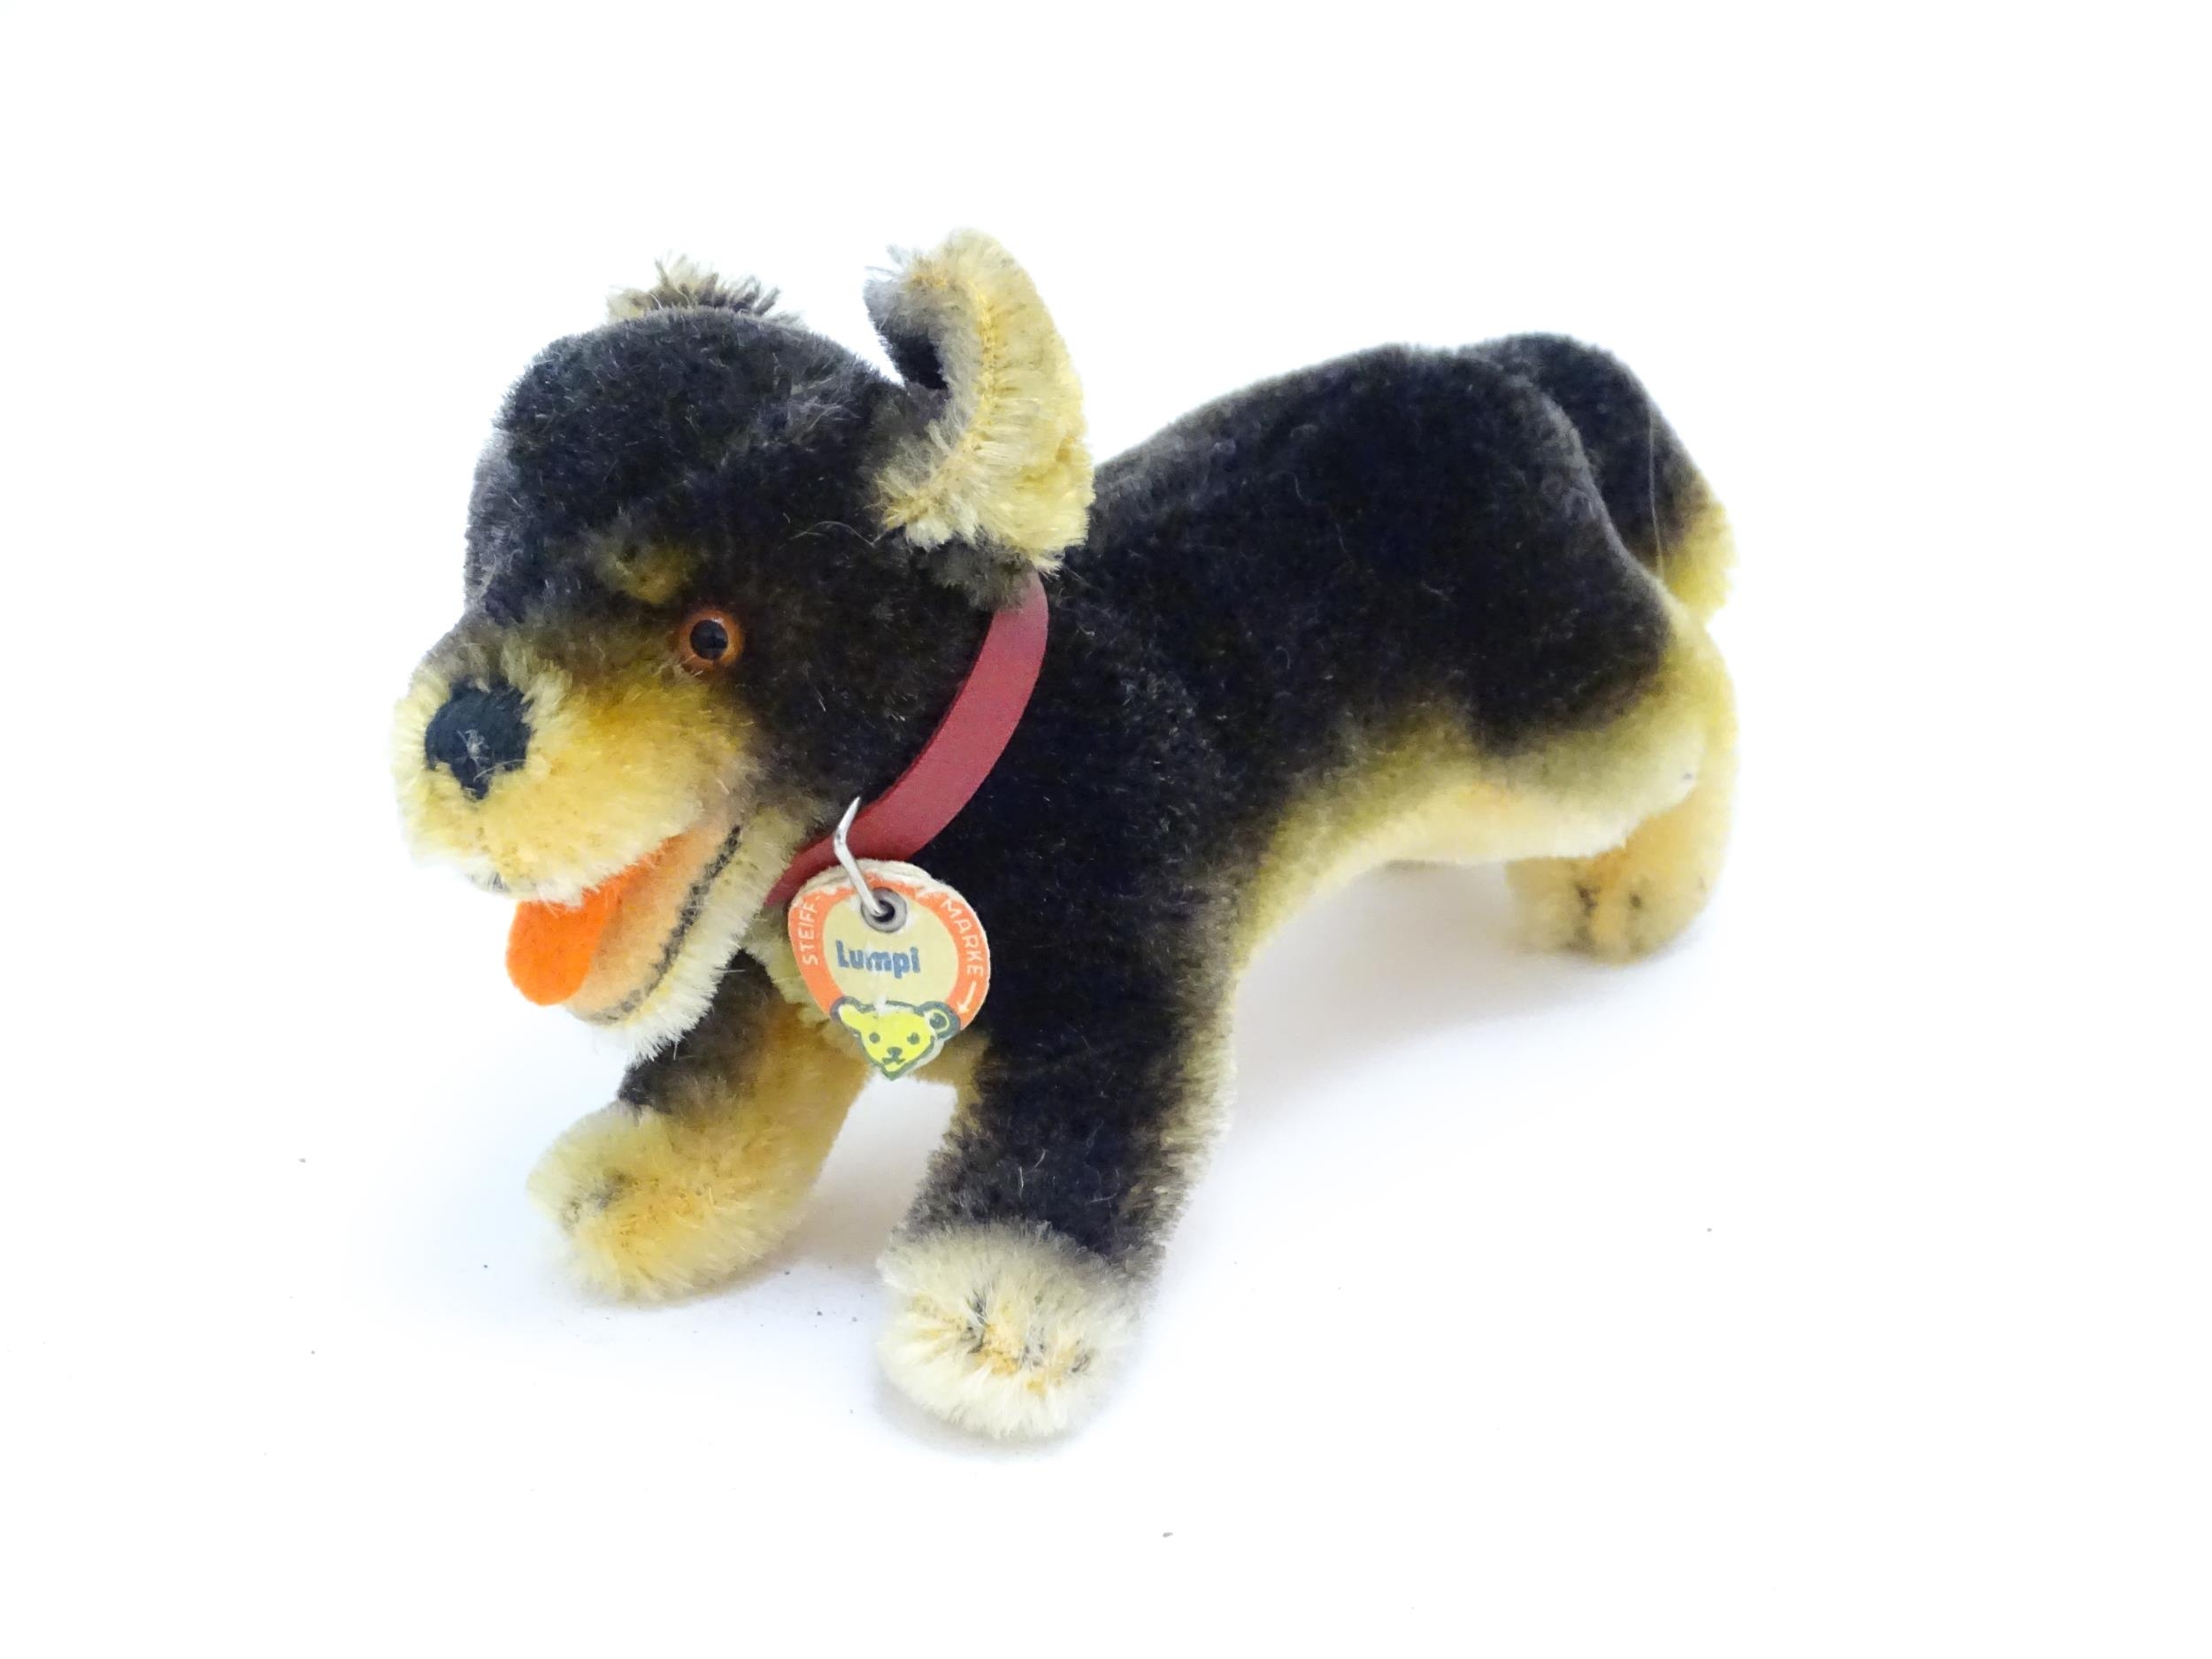 Toy: A 20thC Steiff mohair soft toy modelled as a Dachshund dog - Lumpi, with stitched nose, felt